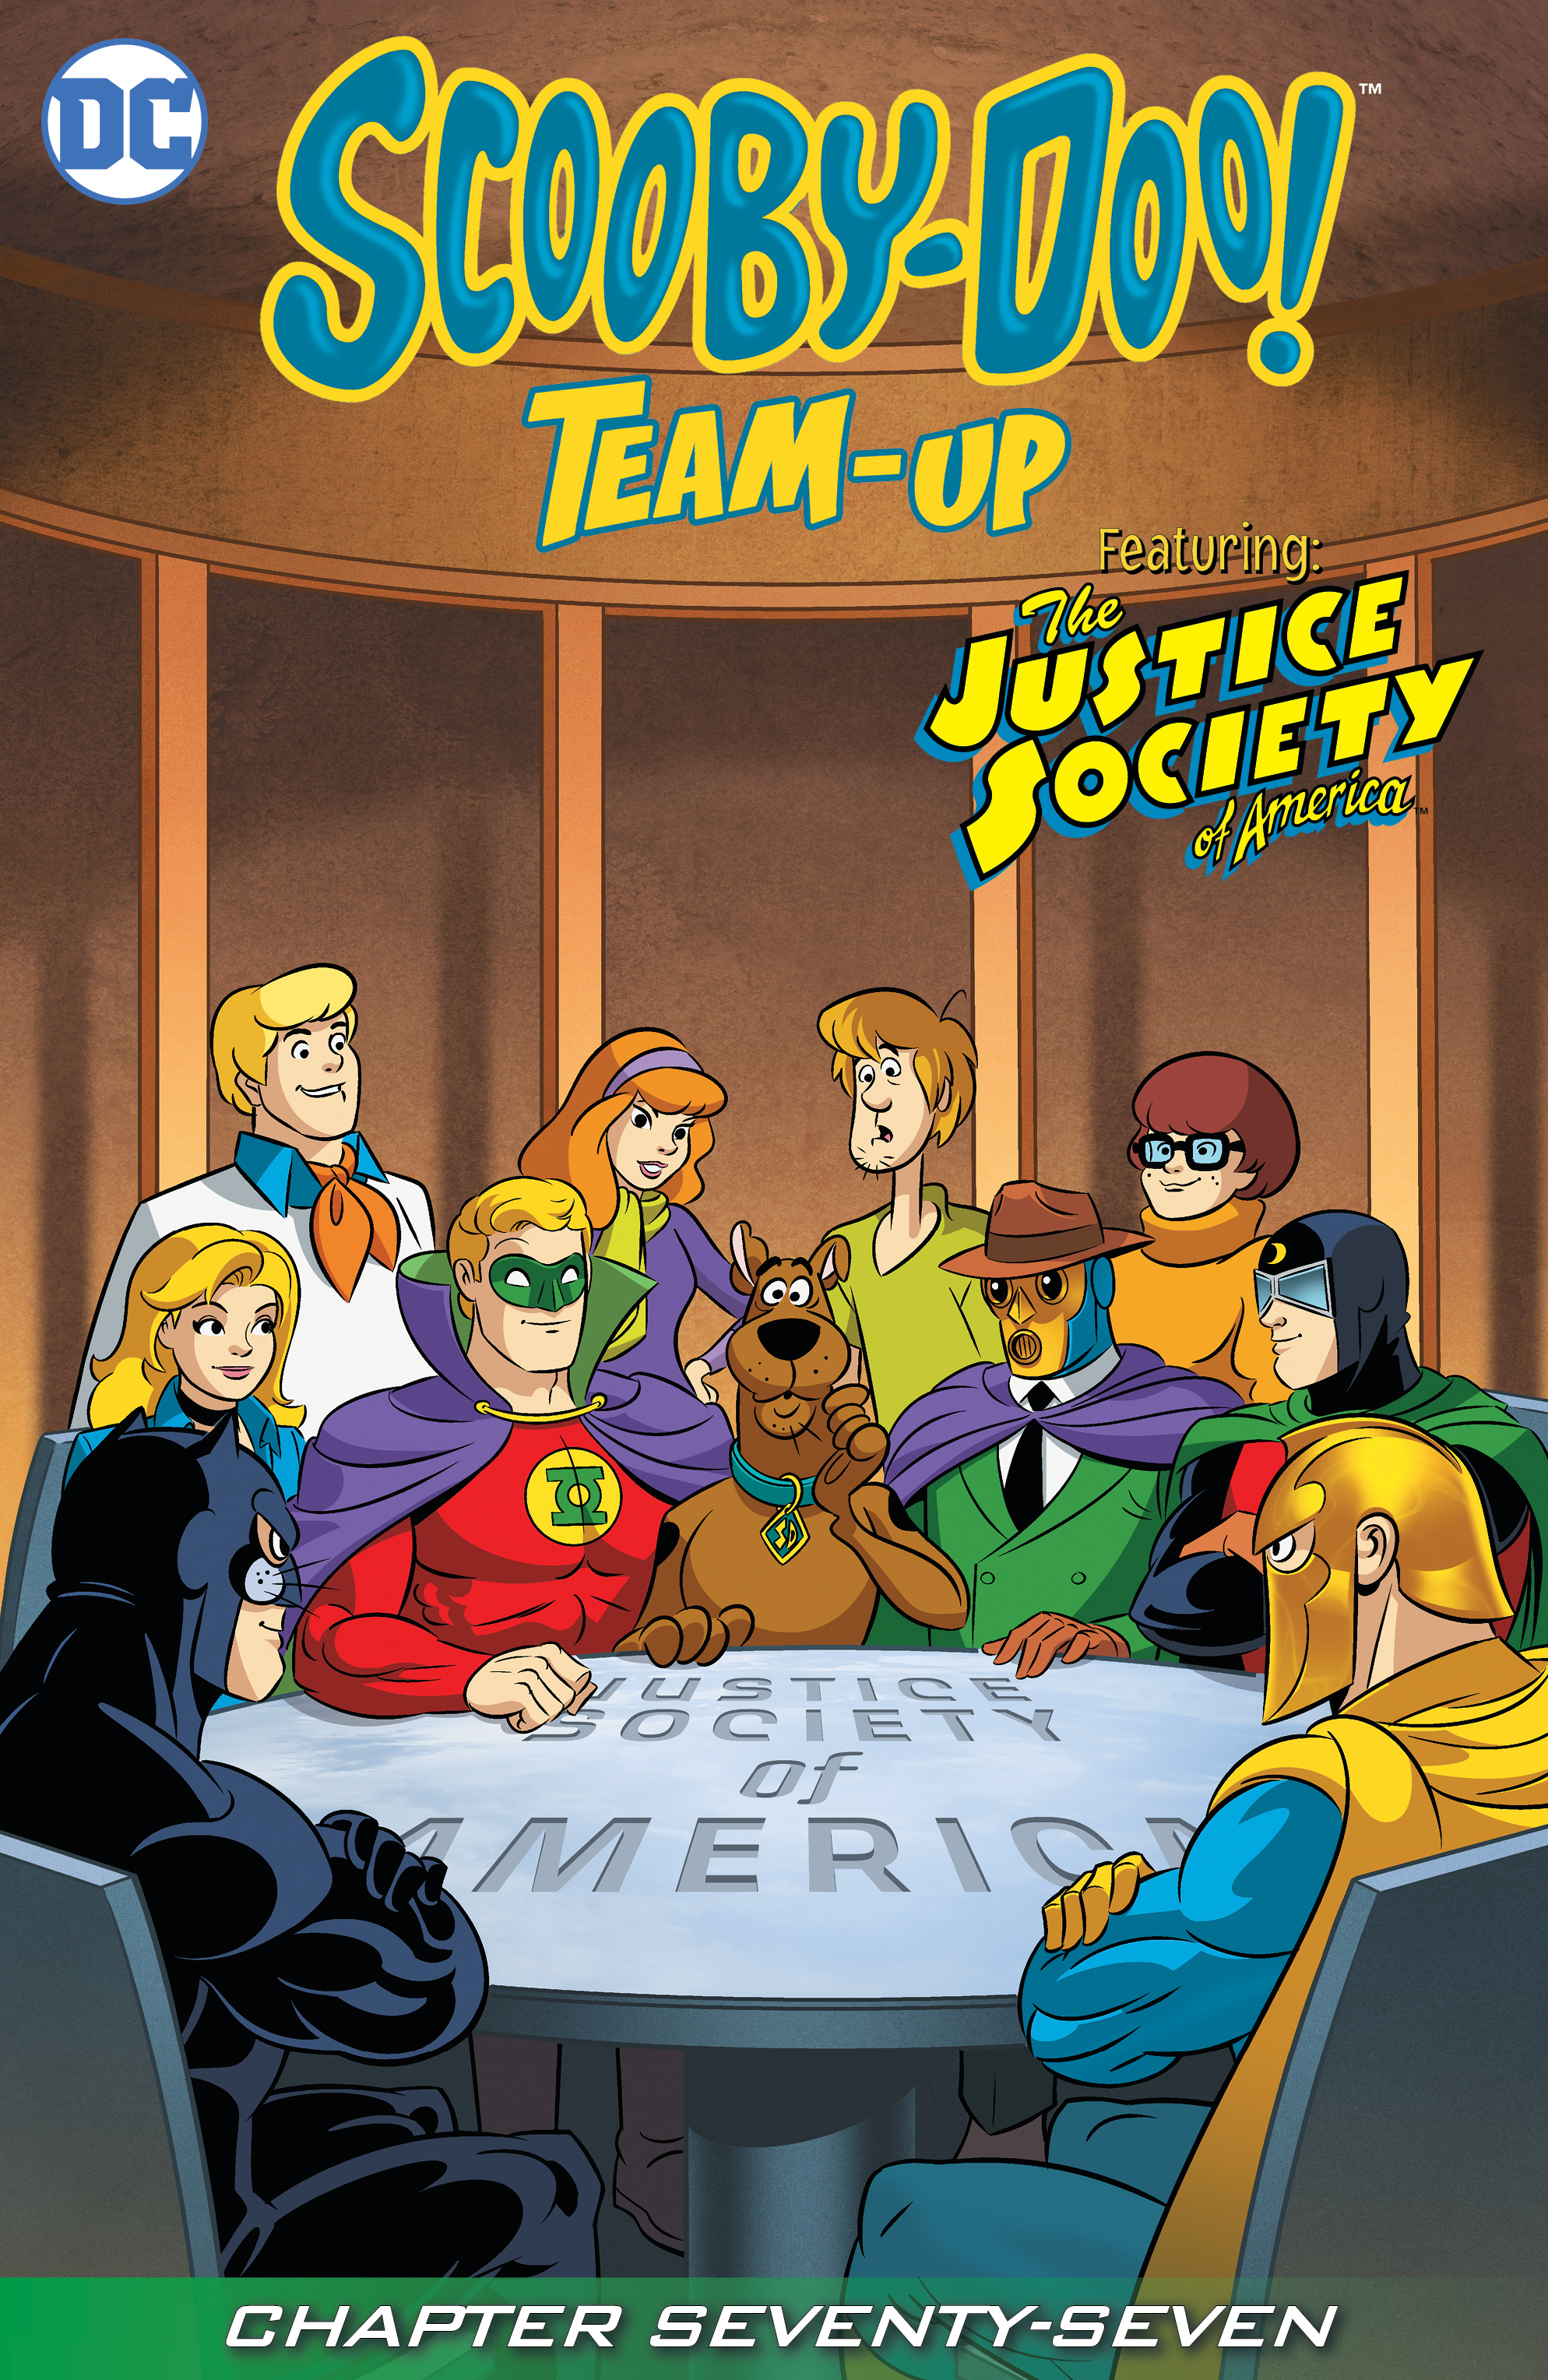 Scooby-Doo Team-Up #77 preview images